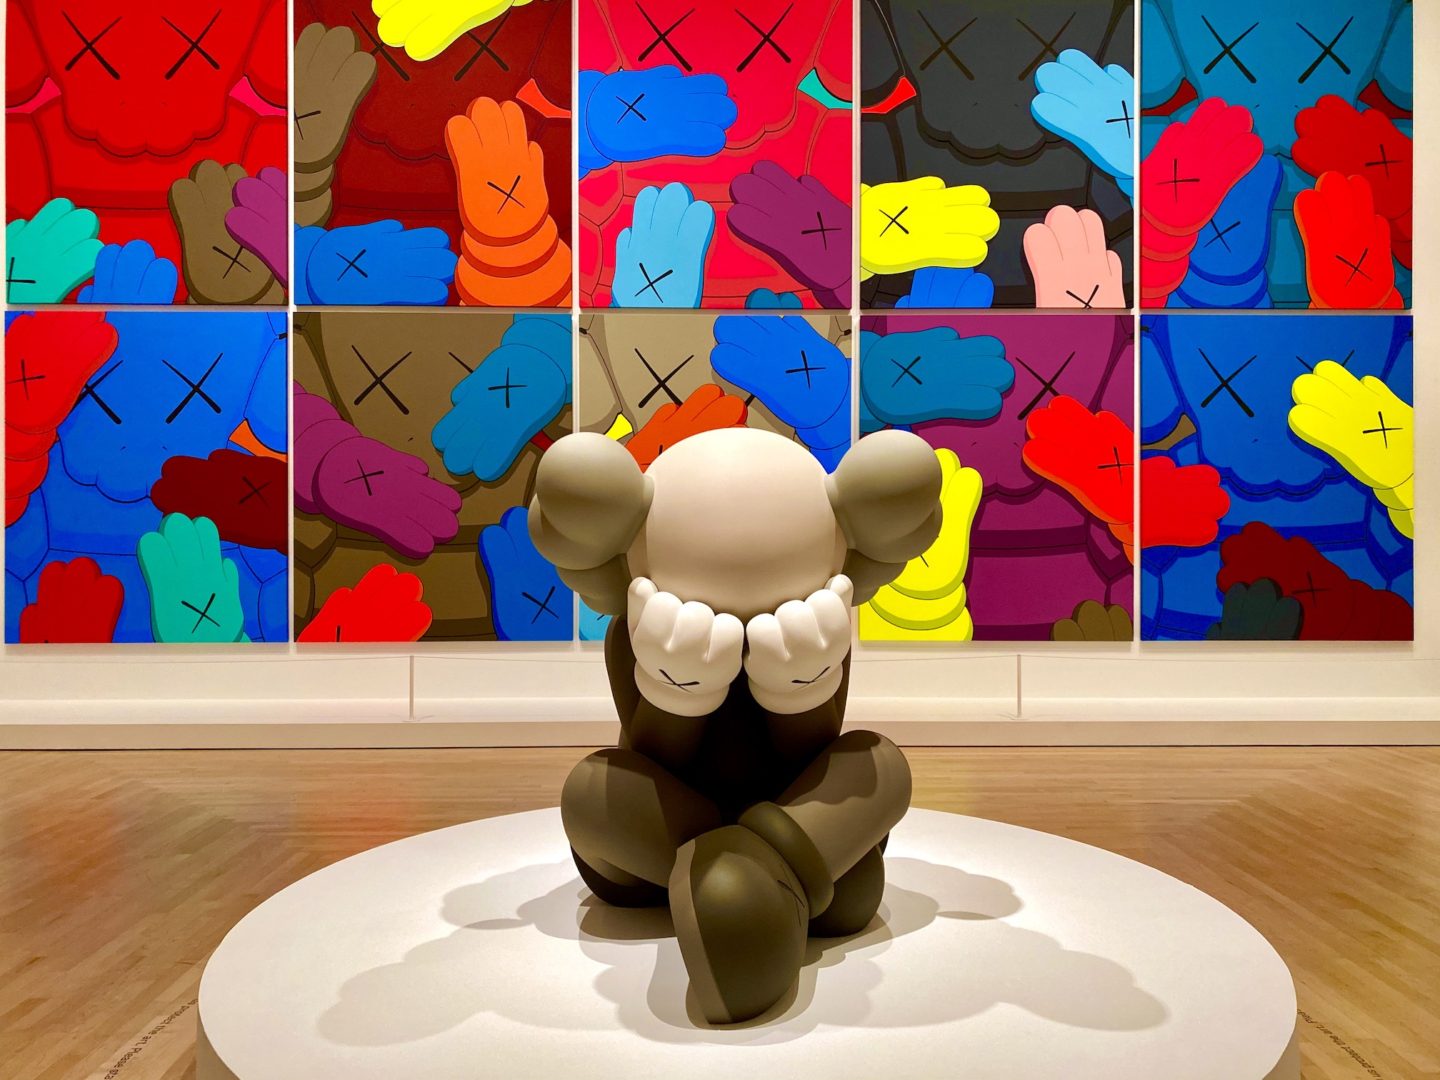 Kaws: What Party